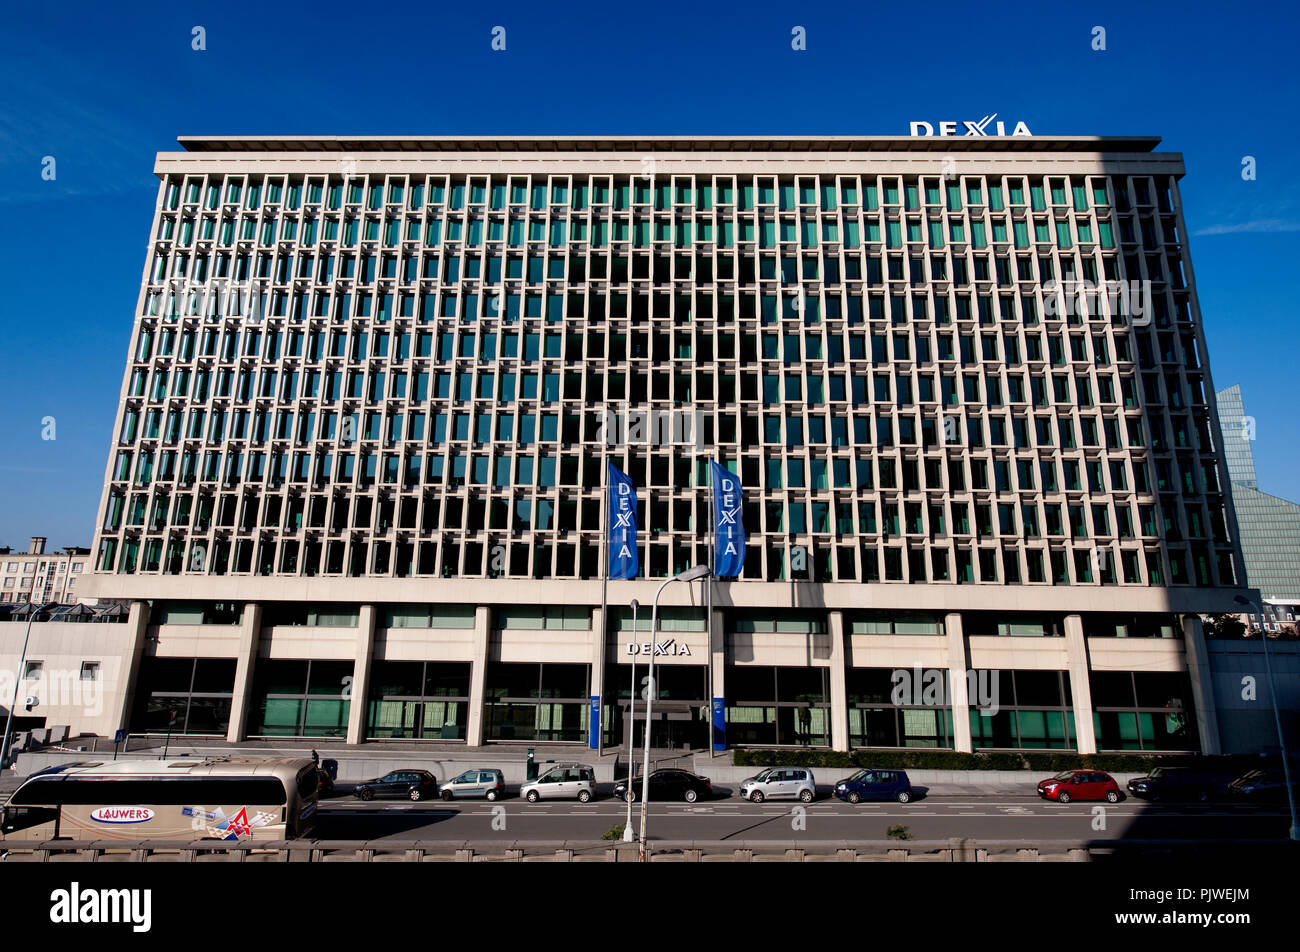 The Dexia headquarters in Brussels on the Pacheco Boulevard (Belgium, 22/10/2011) Stock Photo